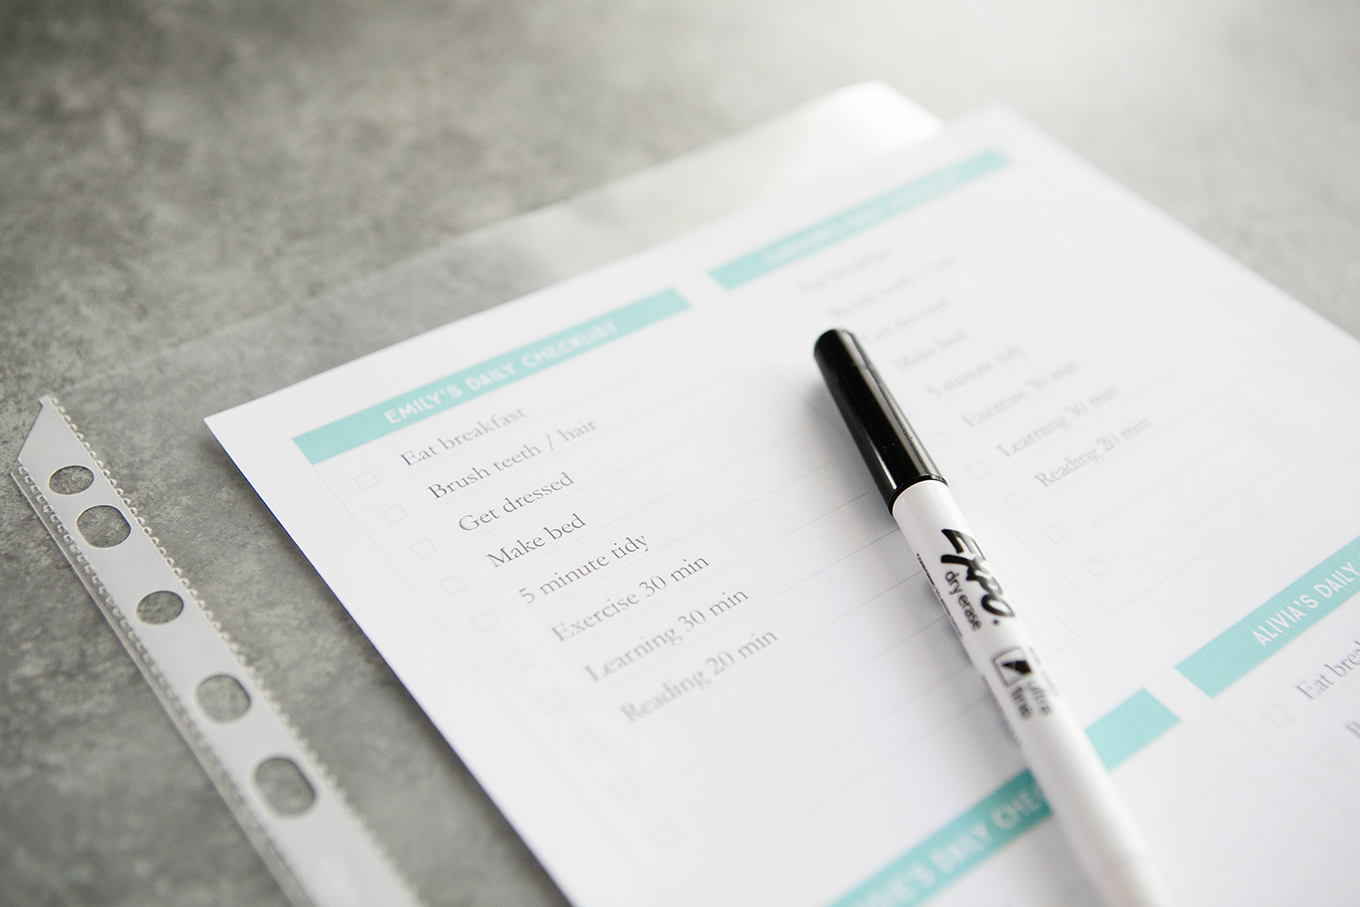 Tired of nagging your kids to get the same things done day after day? This daily responsibilities checklist is simple, but exactly what you need to set clear expectations and encourage personal accountability.